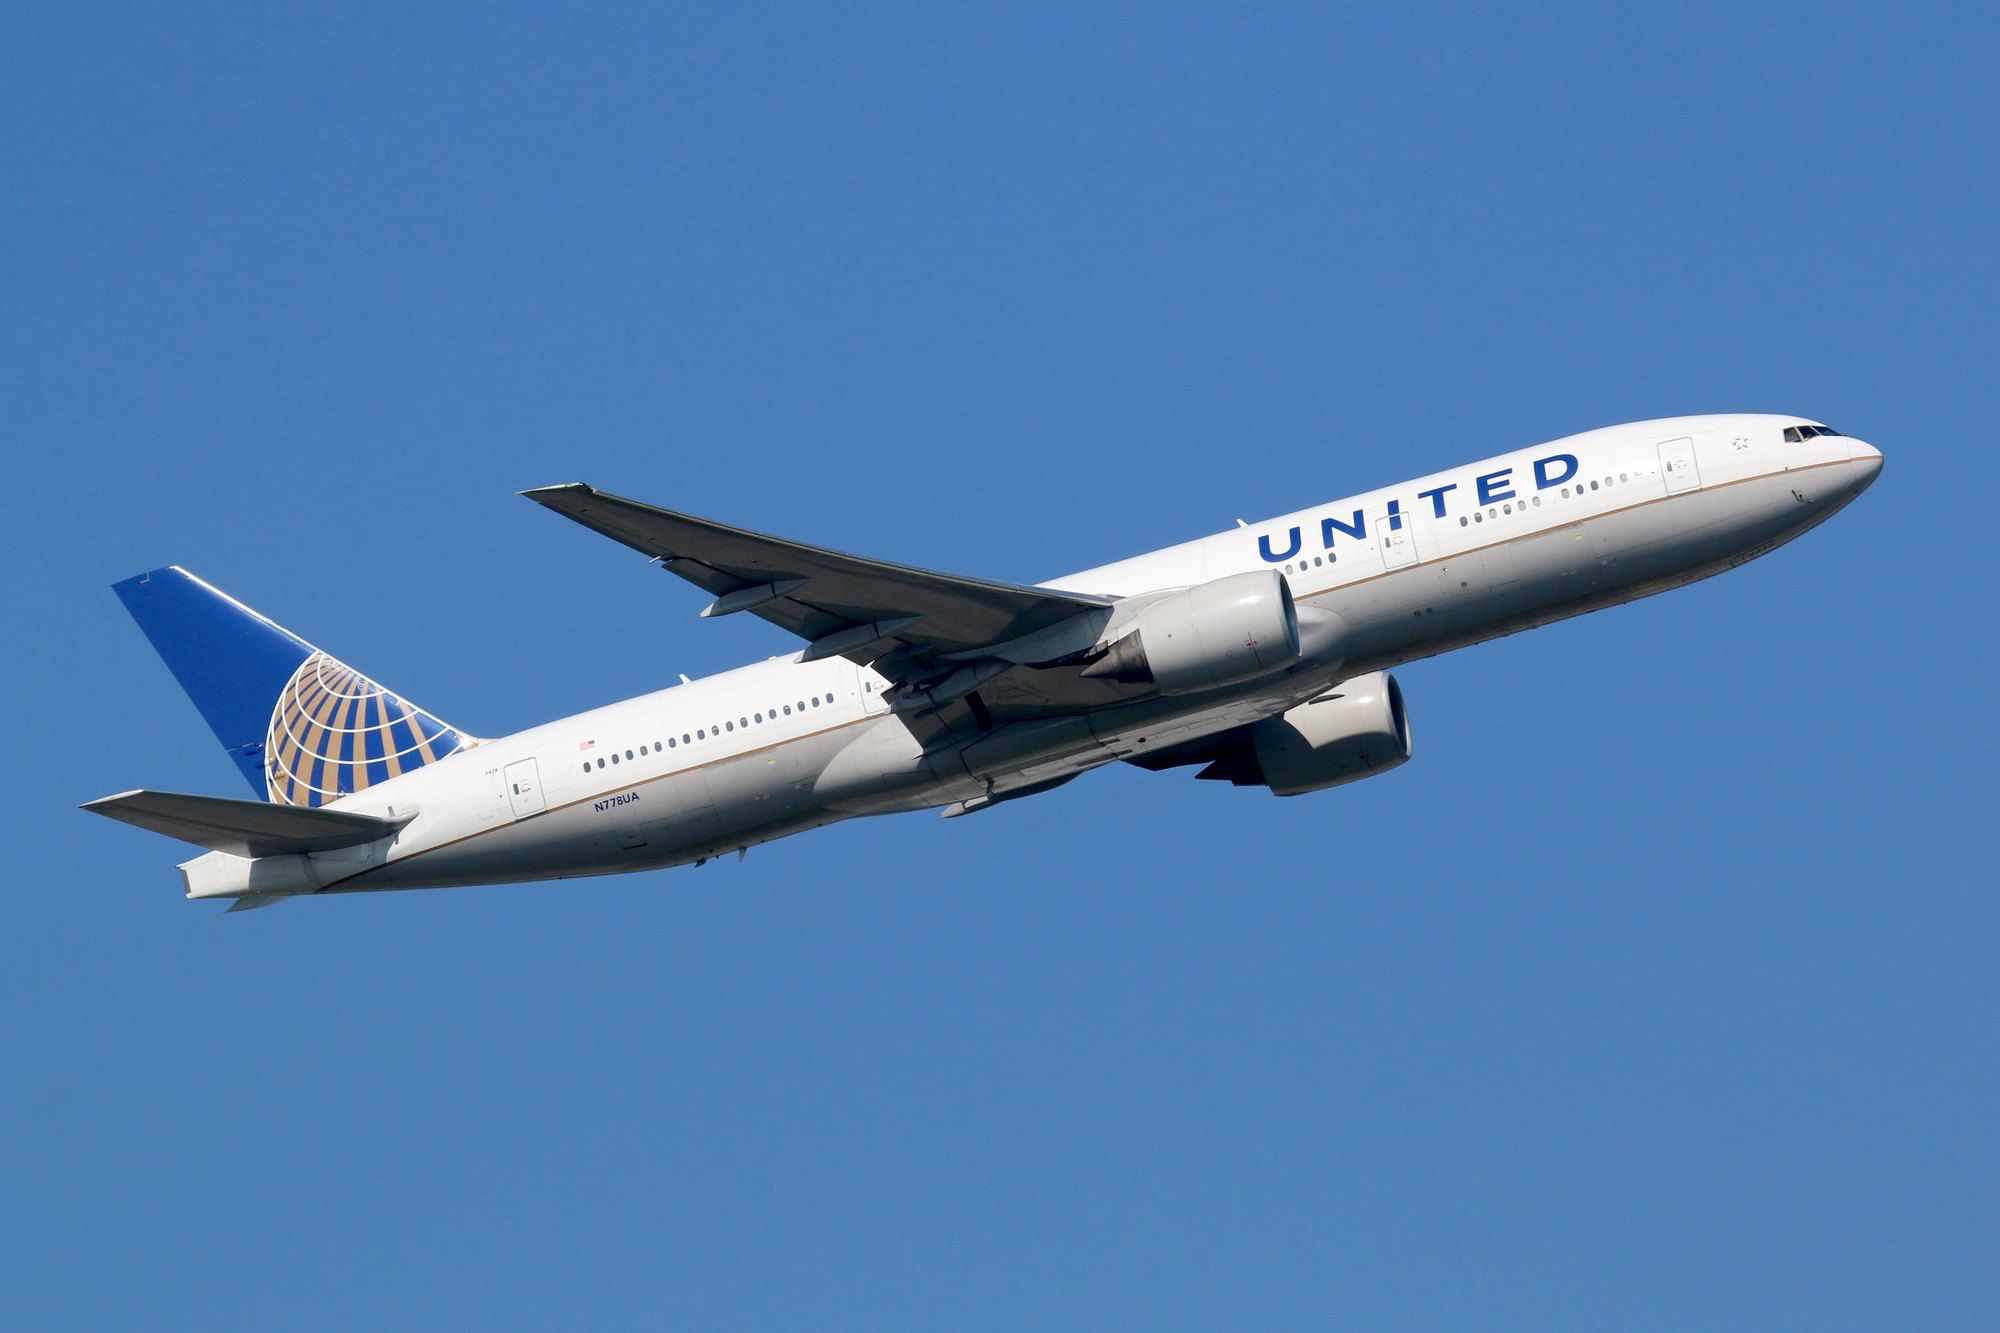 United airlines must face a COVID-19 refund class action lawsuit.